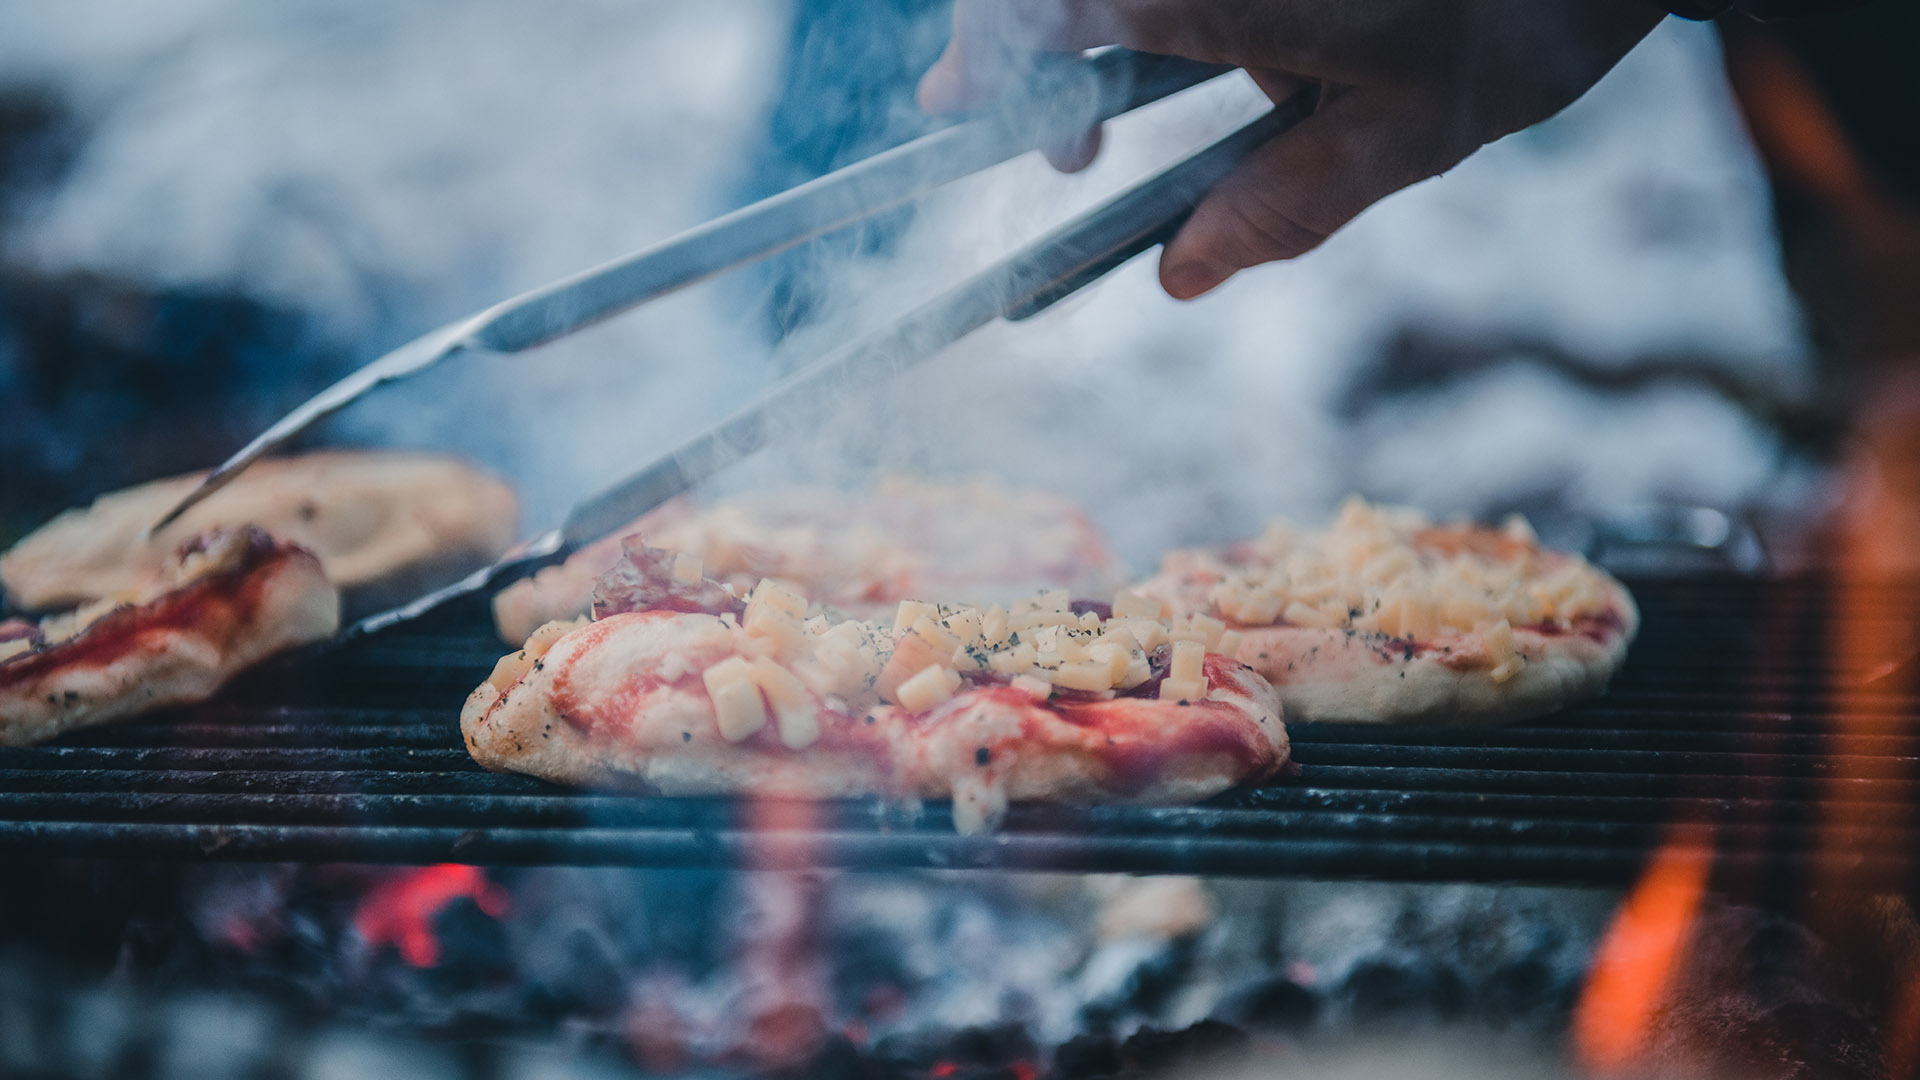 Small pizzas cooking on a grill over a campfire with a hand holding tongs grabbing the edge of one of the pizzas.